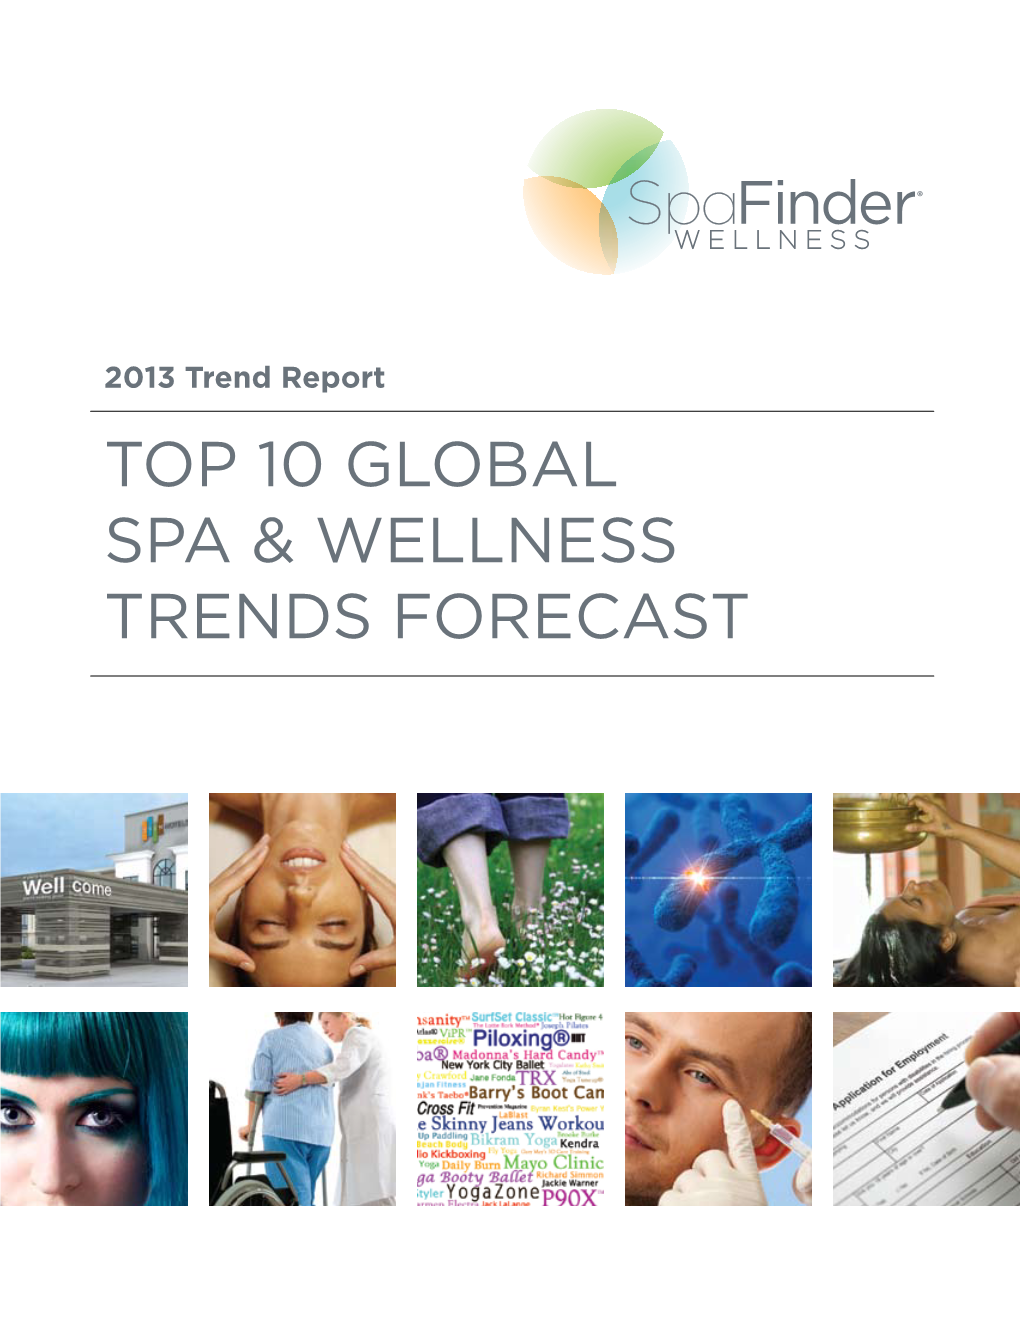 2013 Trend Report Top 10 Global Spa & Wellness Trends Forecast